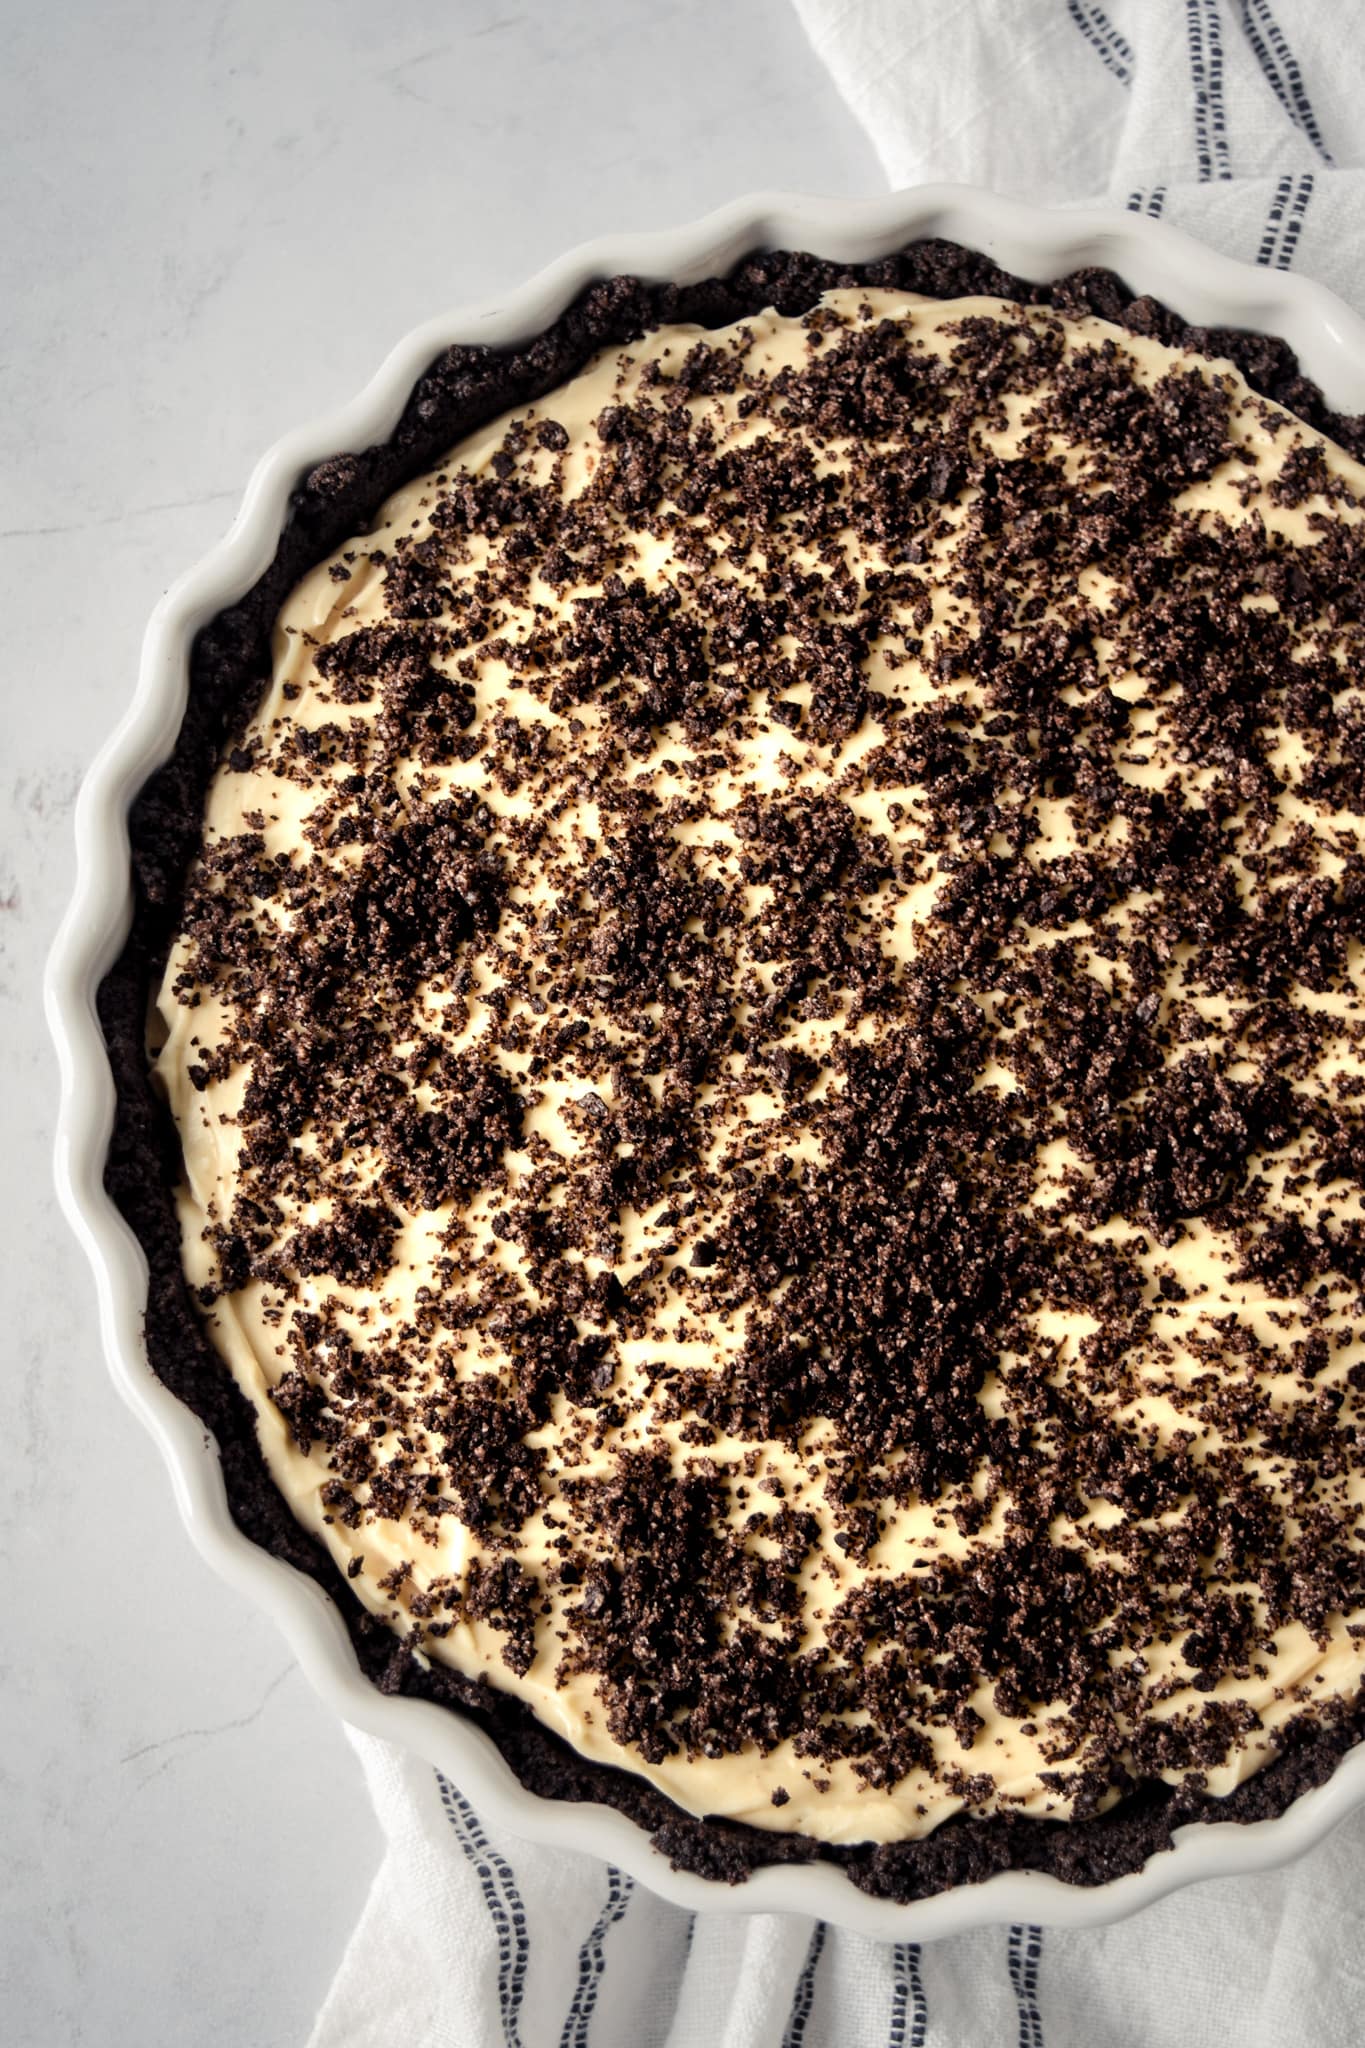 No-Bake Oreo Cheesecake with Peanut Butter in Tart Pan